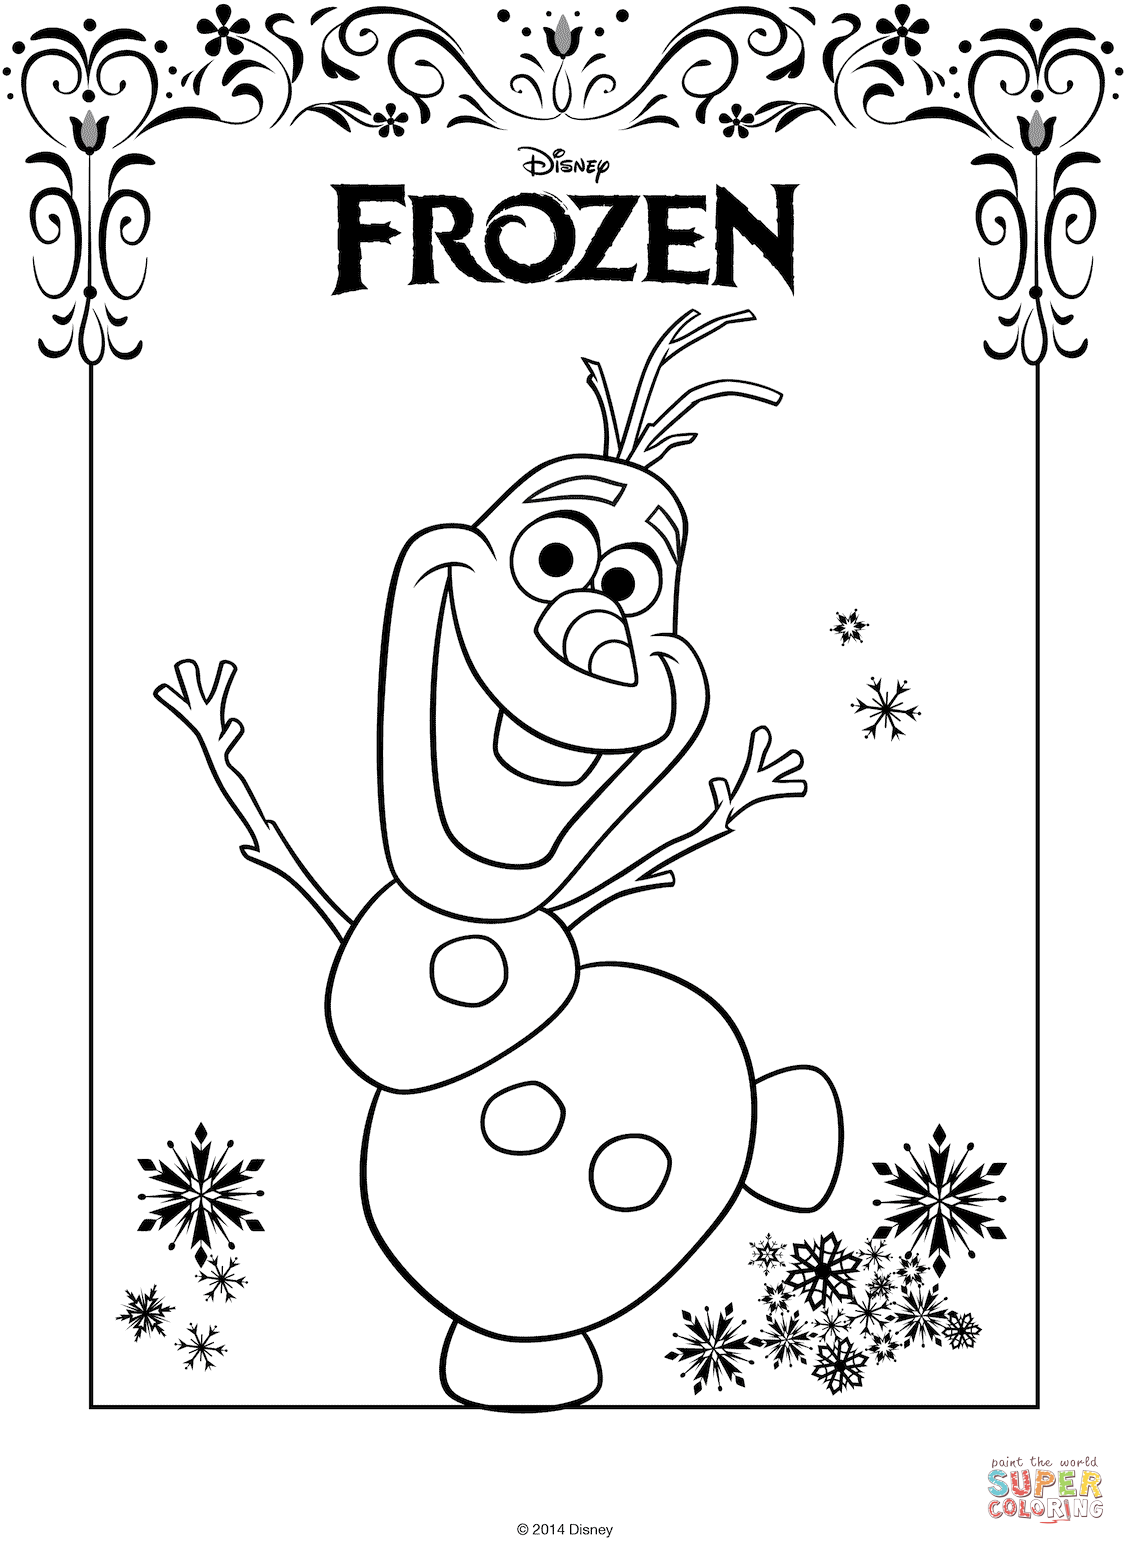 Anna From The Frozen Movie Coloring Page